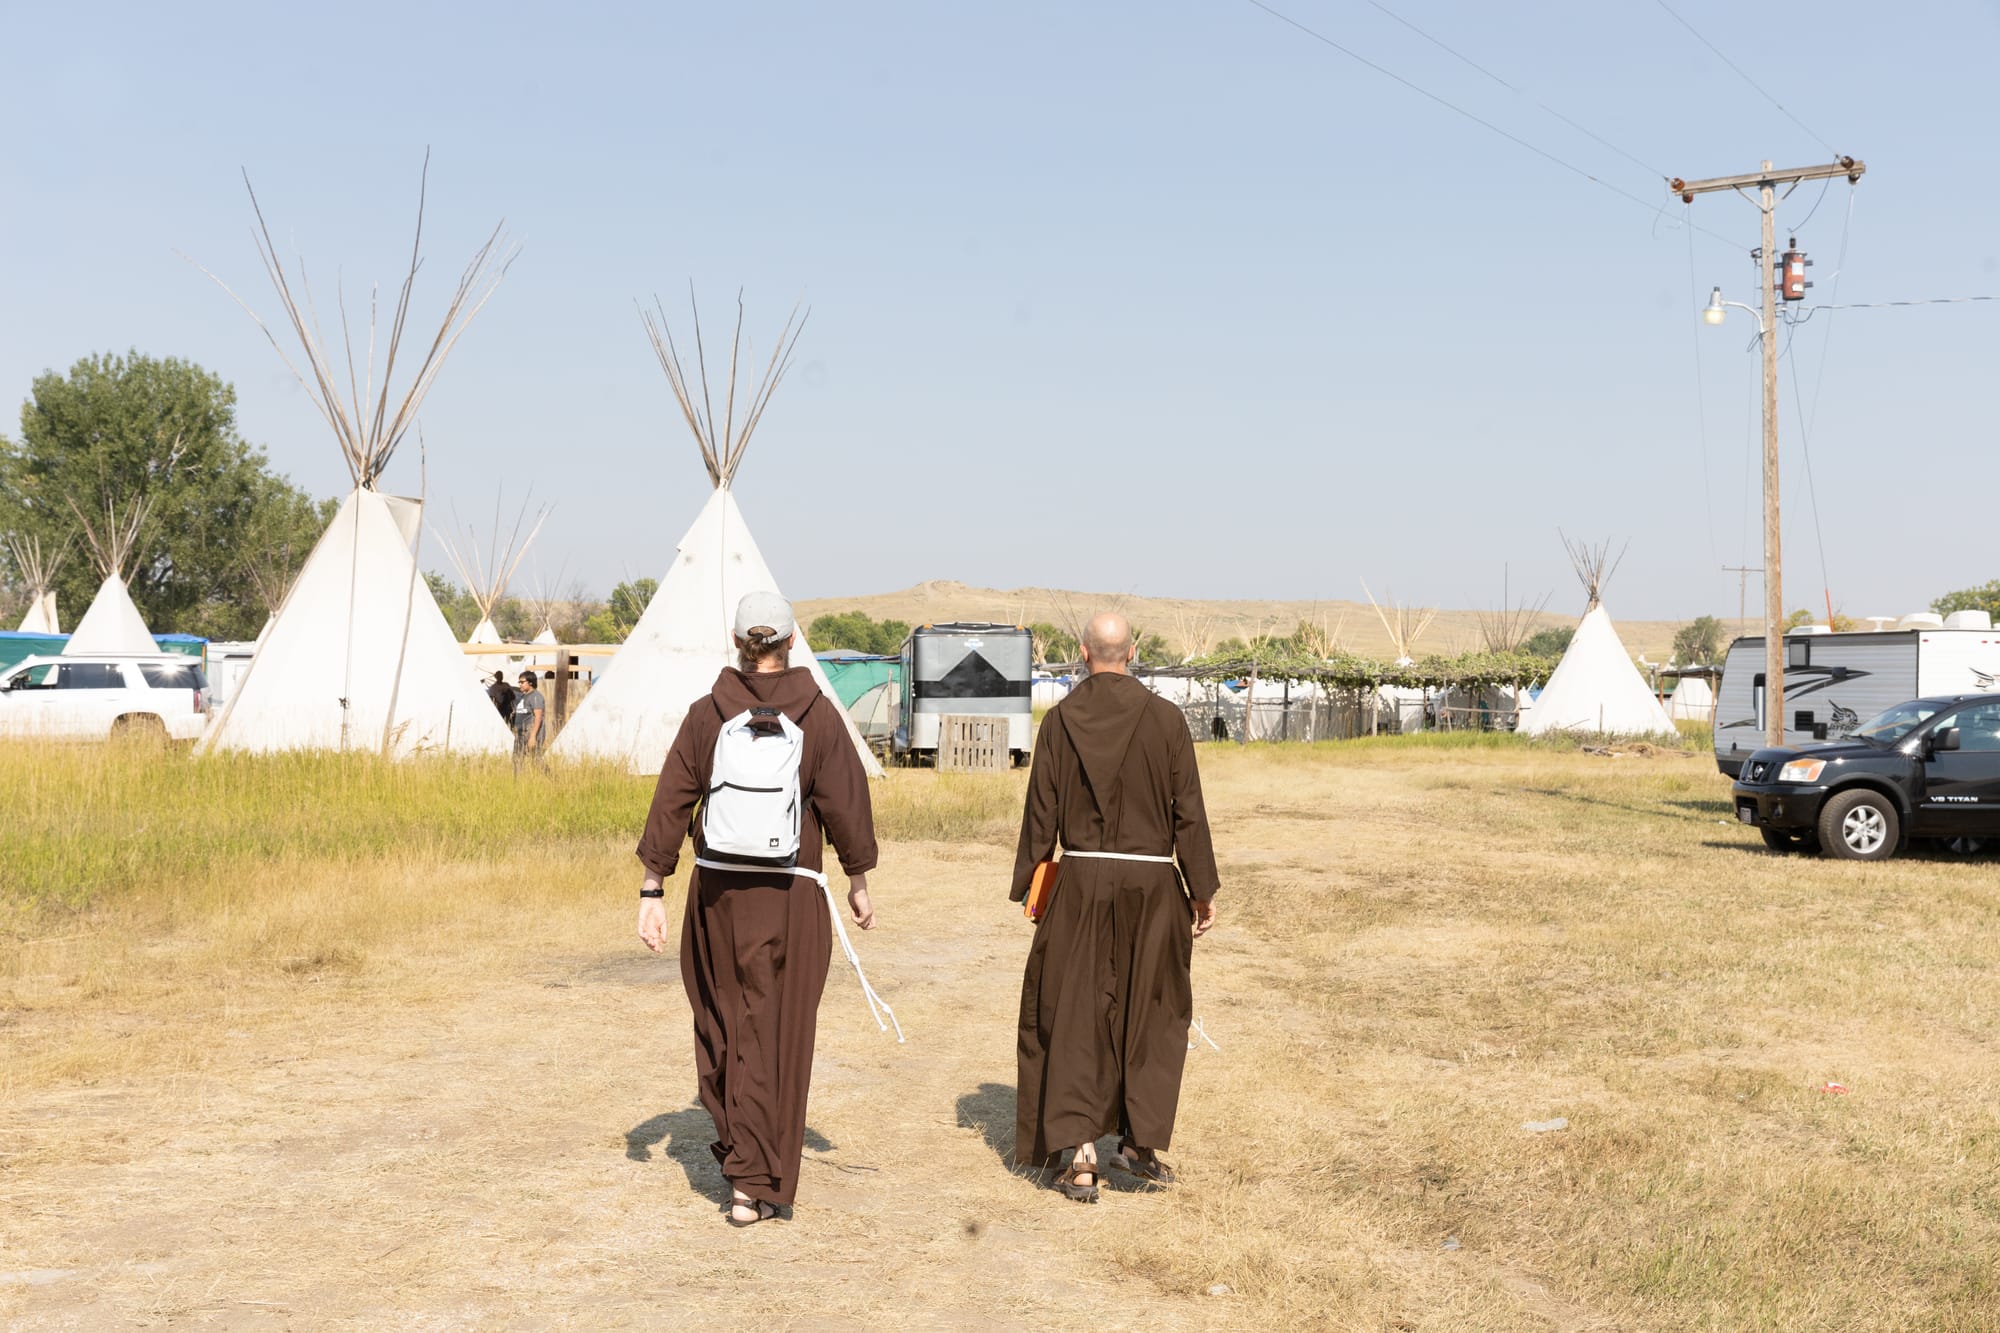 Two Capuchin friars in brown habits walking amidst white teepees.